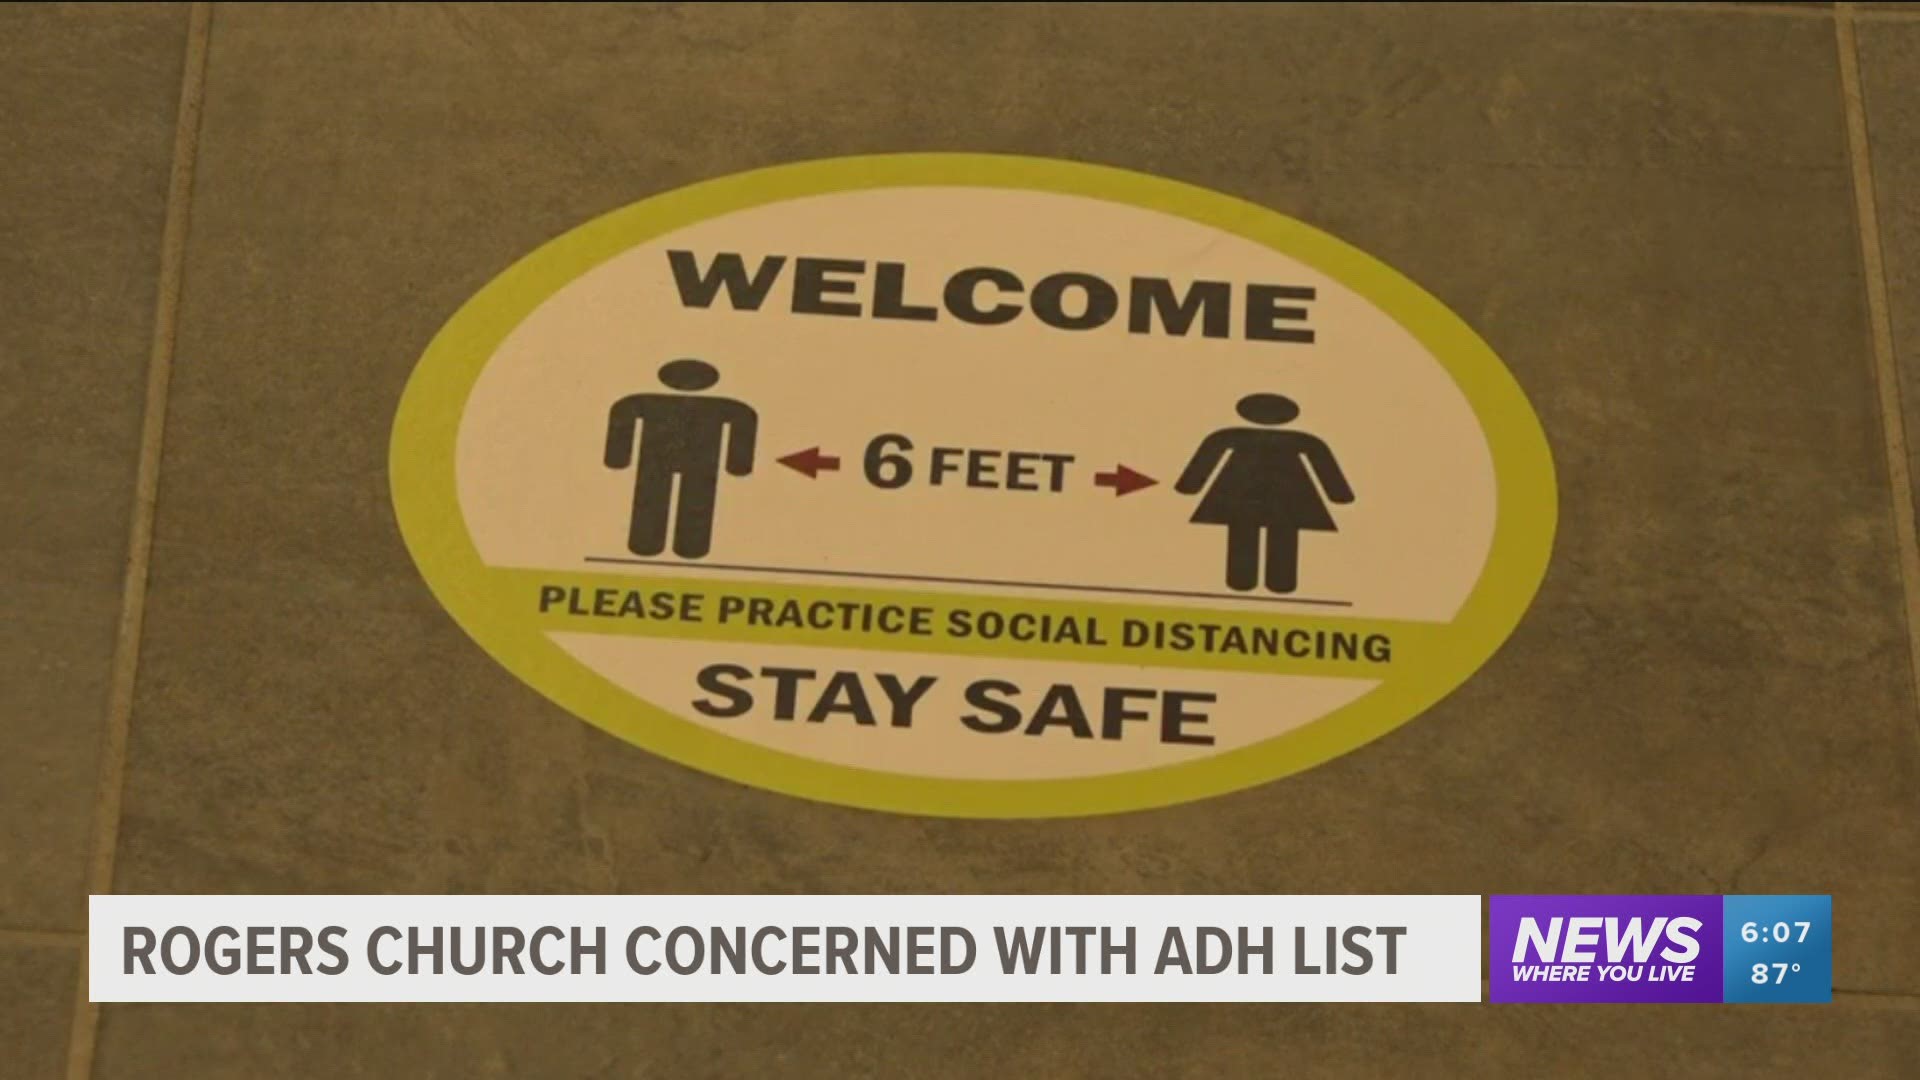 Rogers church concerned with ADH COVID-19 list